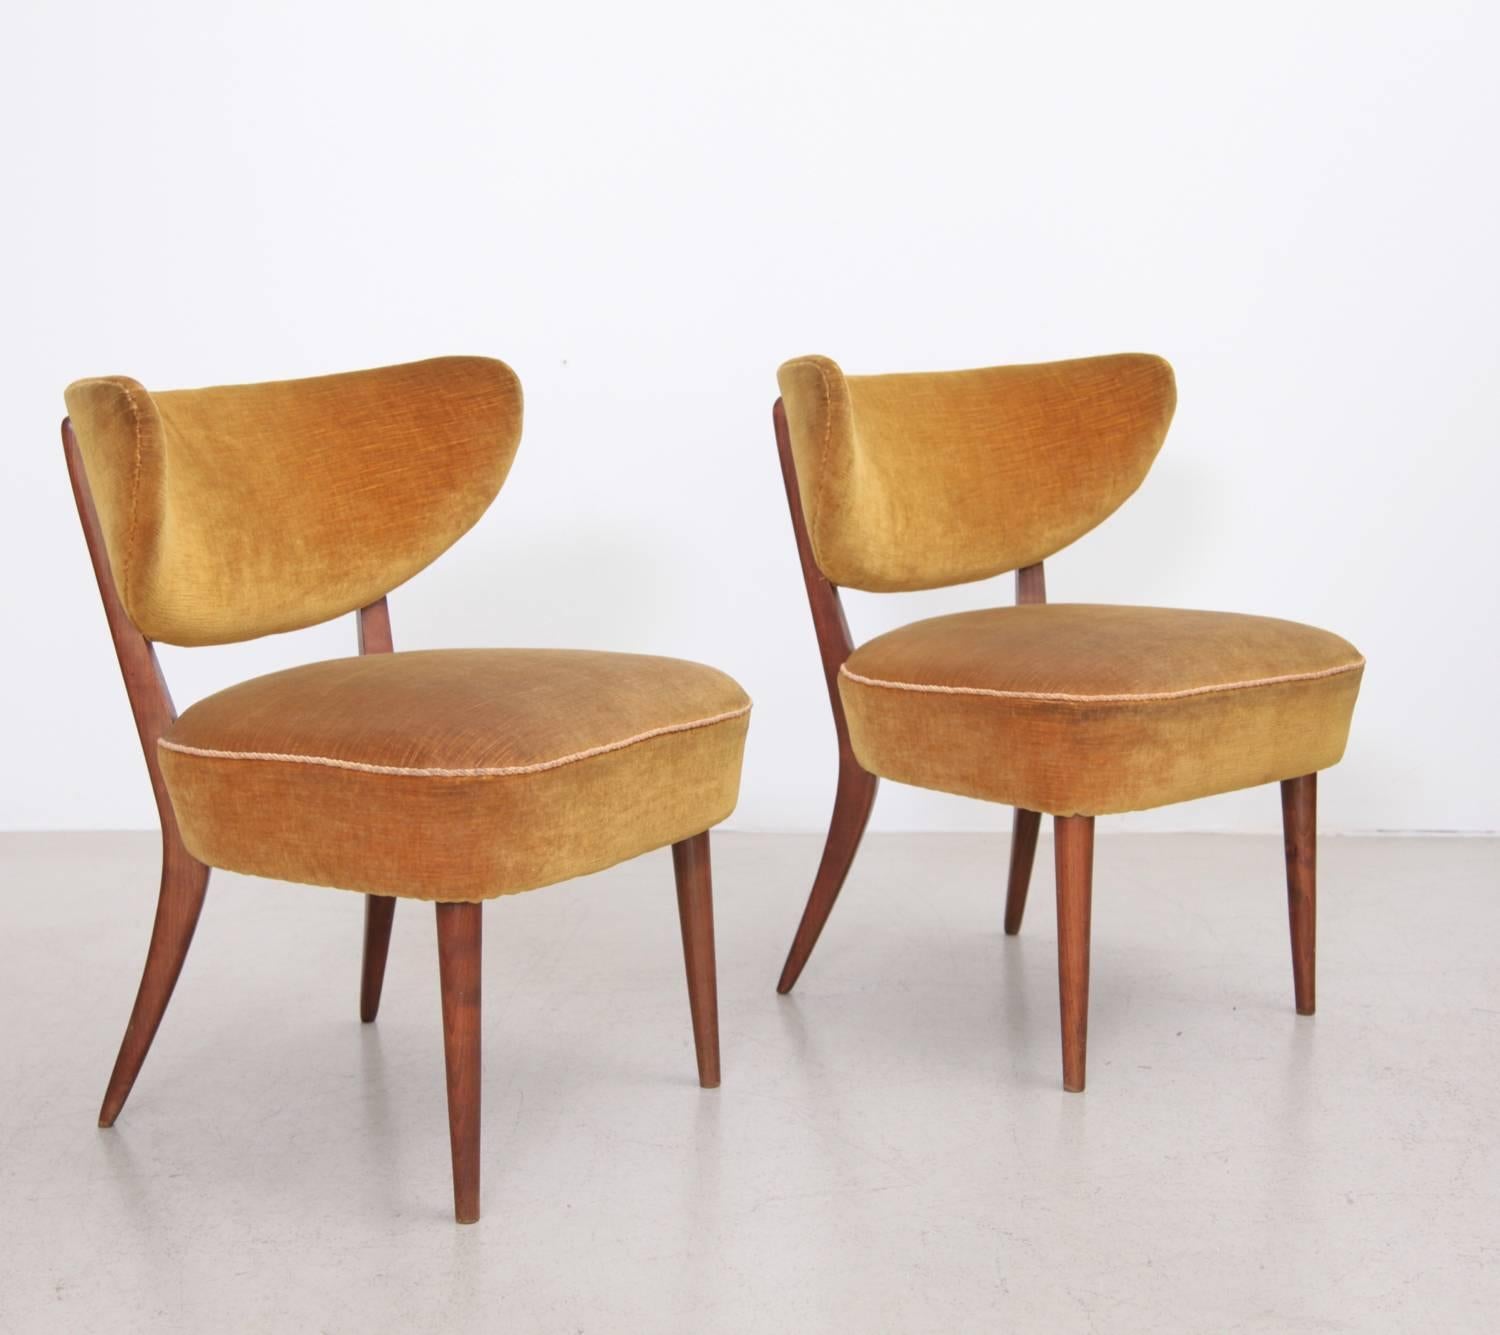 Rare pair by Traulsen architects in mohair in very good vintage condition. Very sculptural chairs.